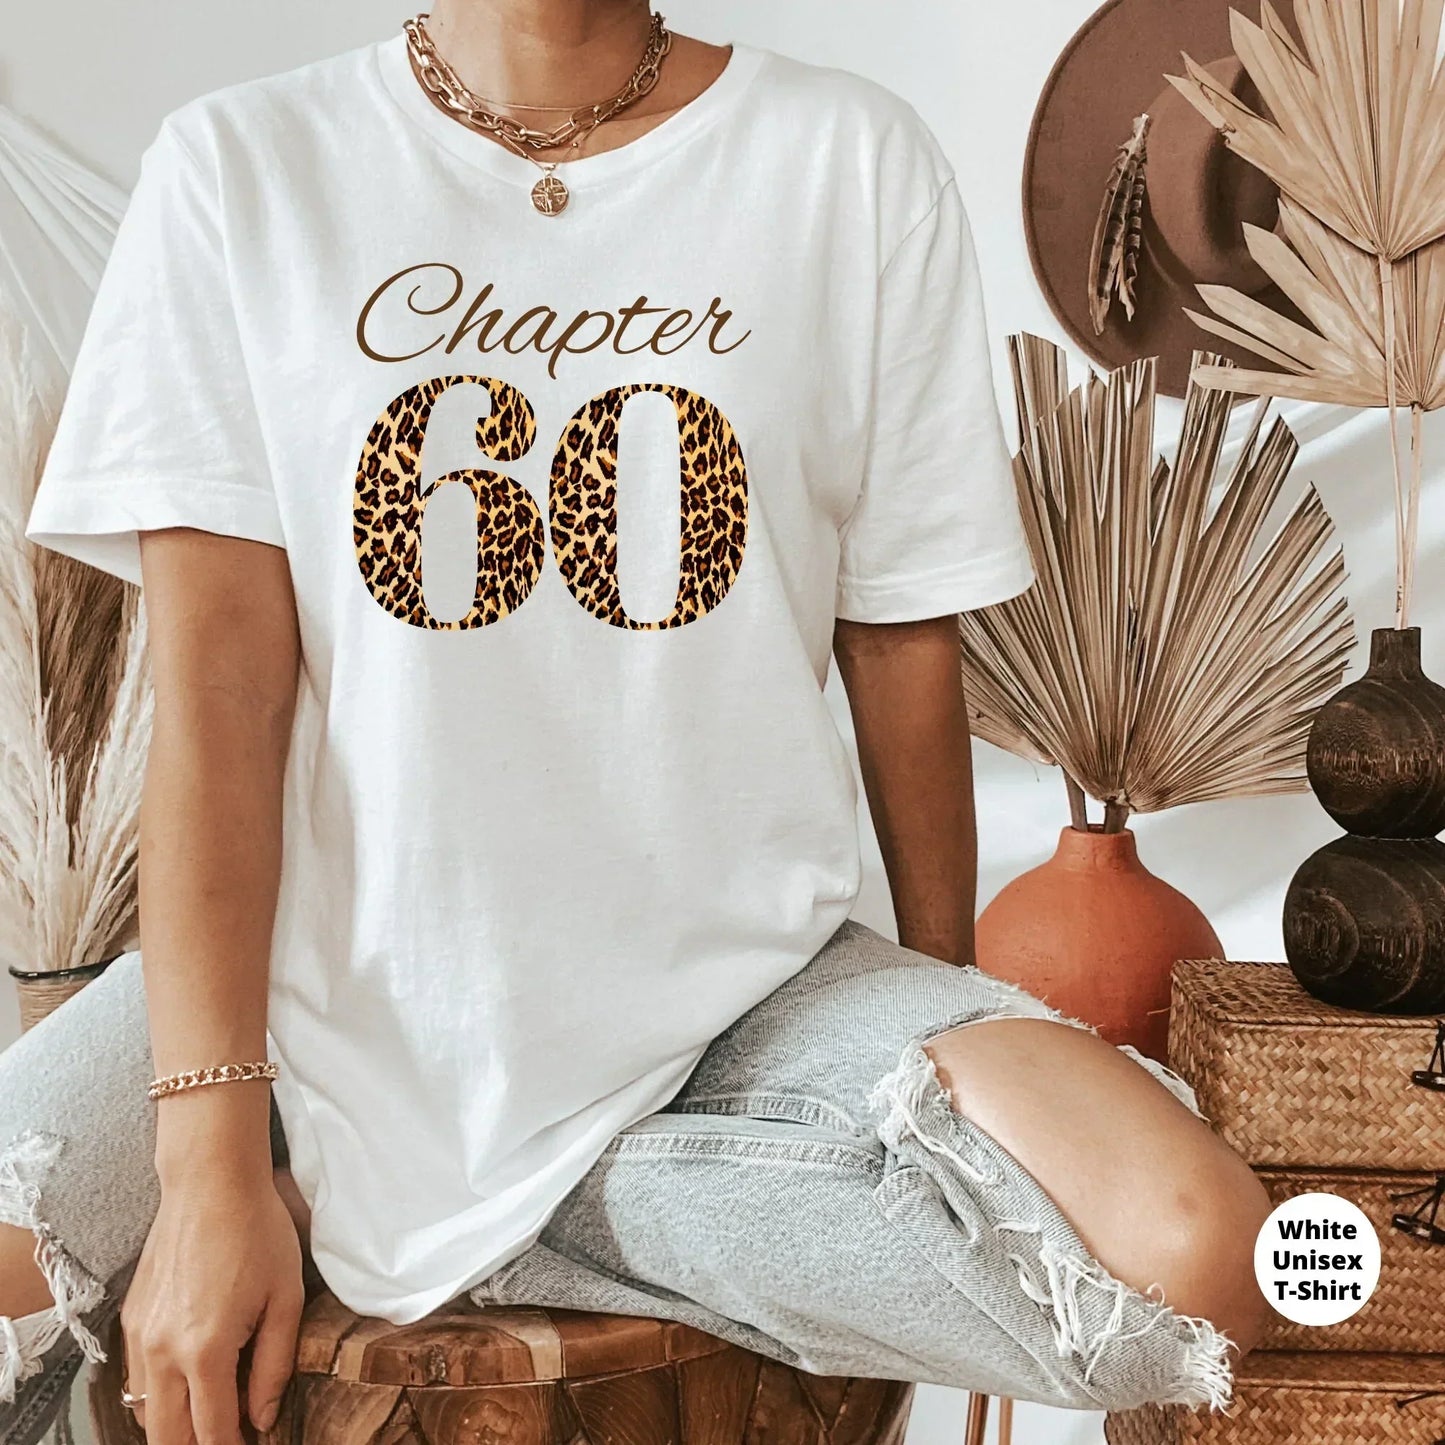 Chapter Sixty Birthday Shirt, Embrace Your Wisdom and Celebrate Your 60th Birthday with Style - Get Your Premium Birthday Shirt Today! HMDesignStudioUS